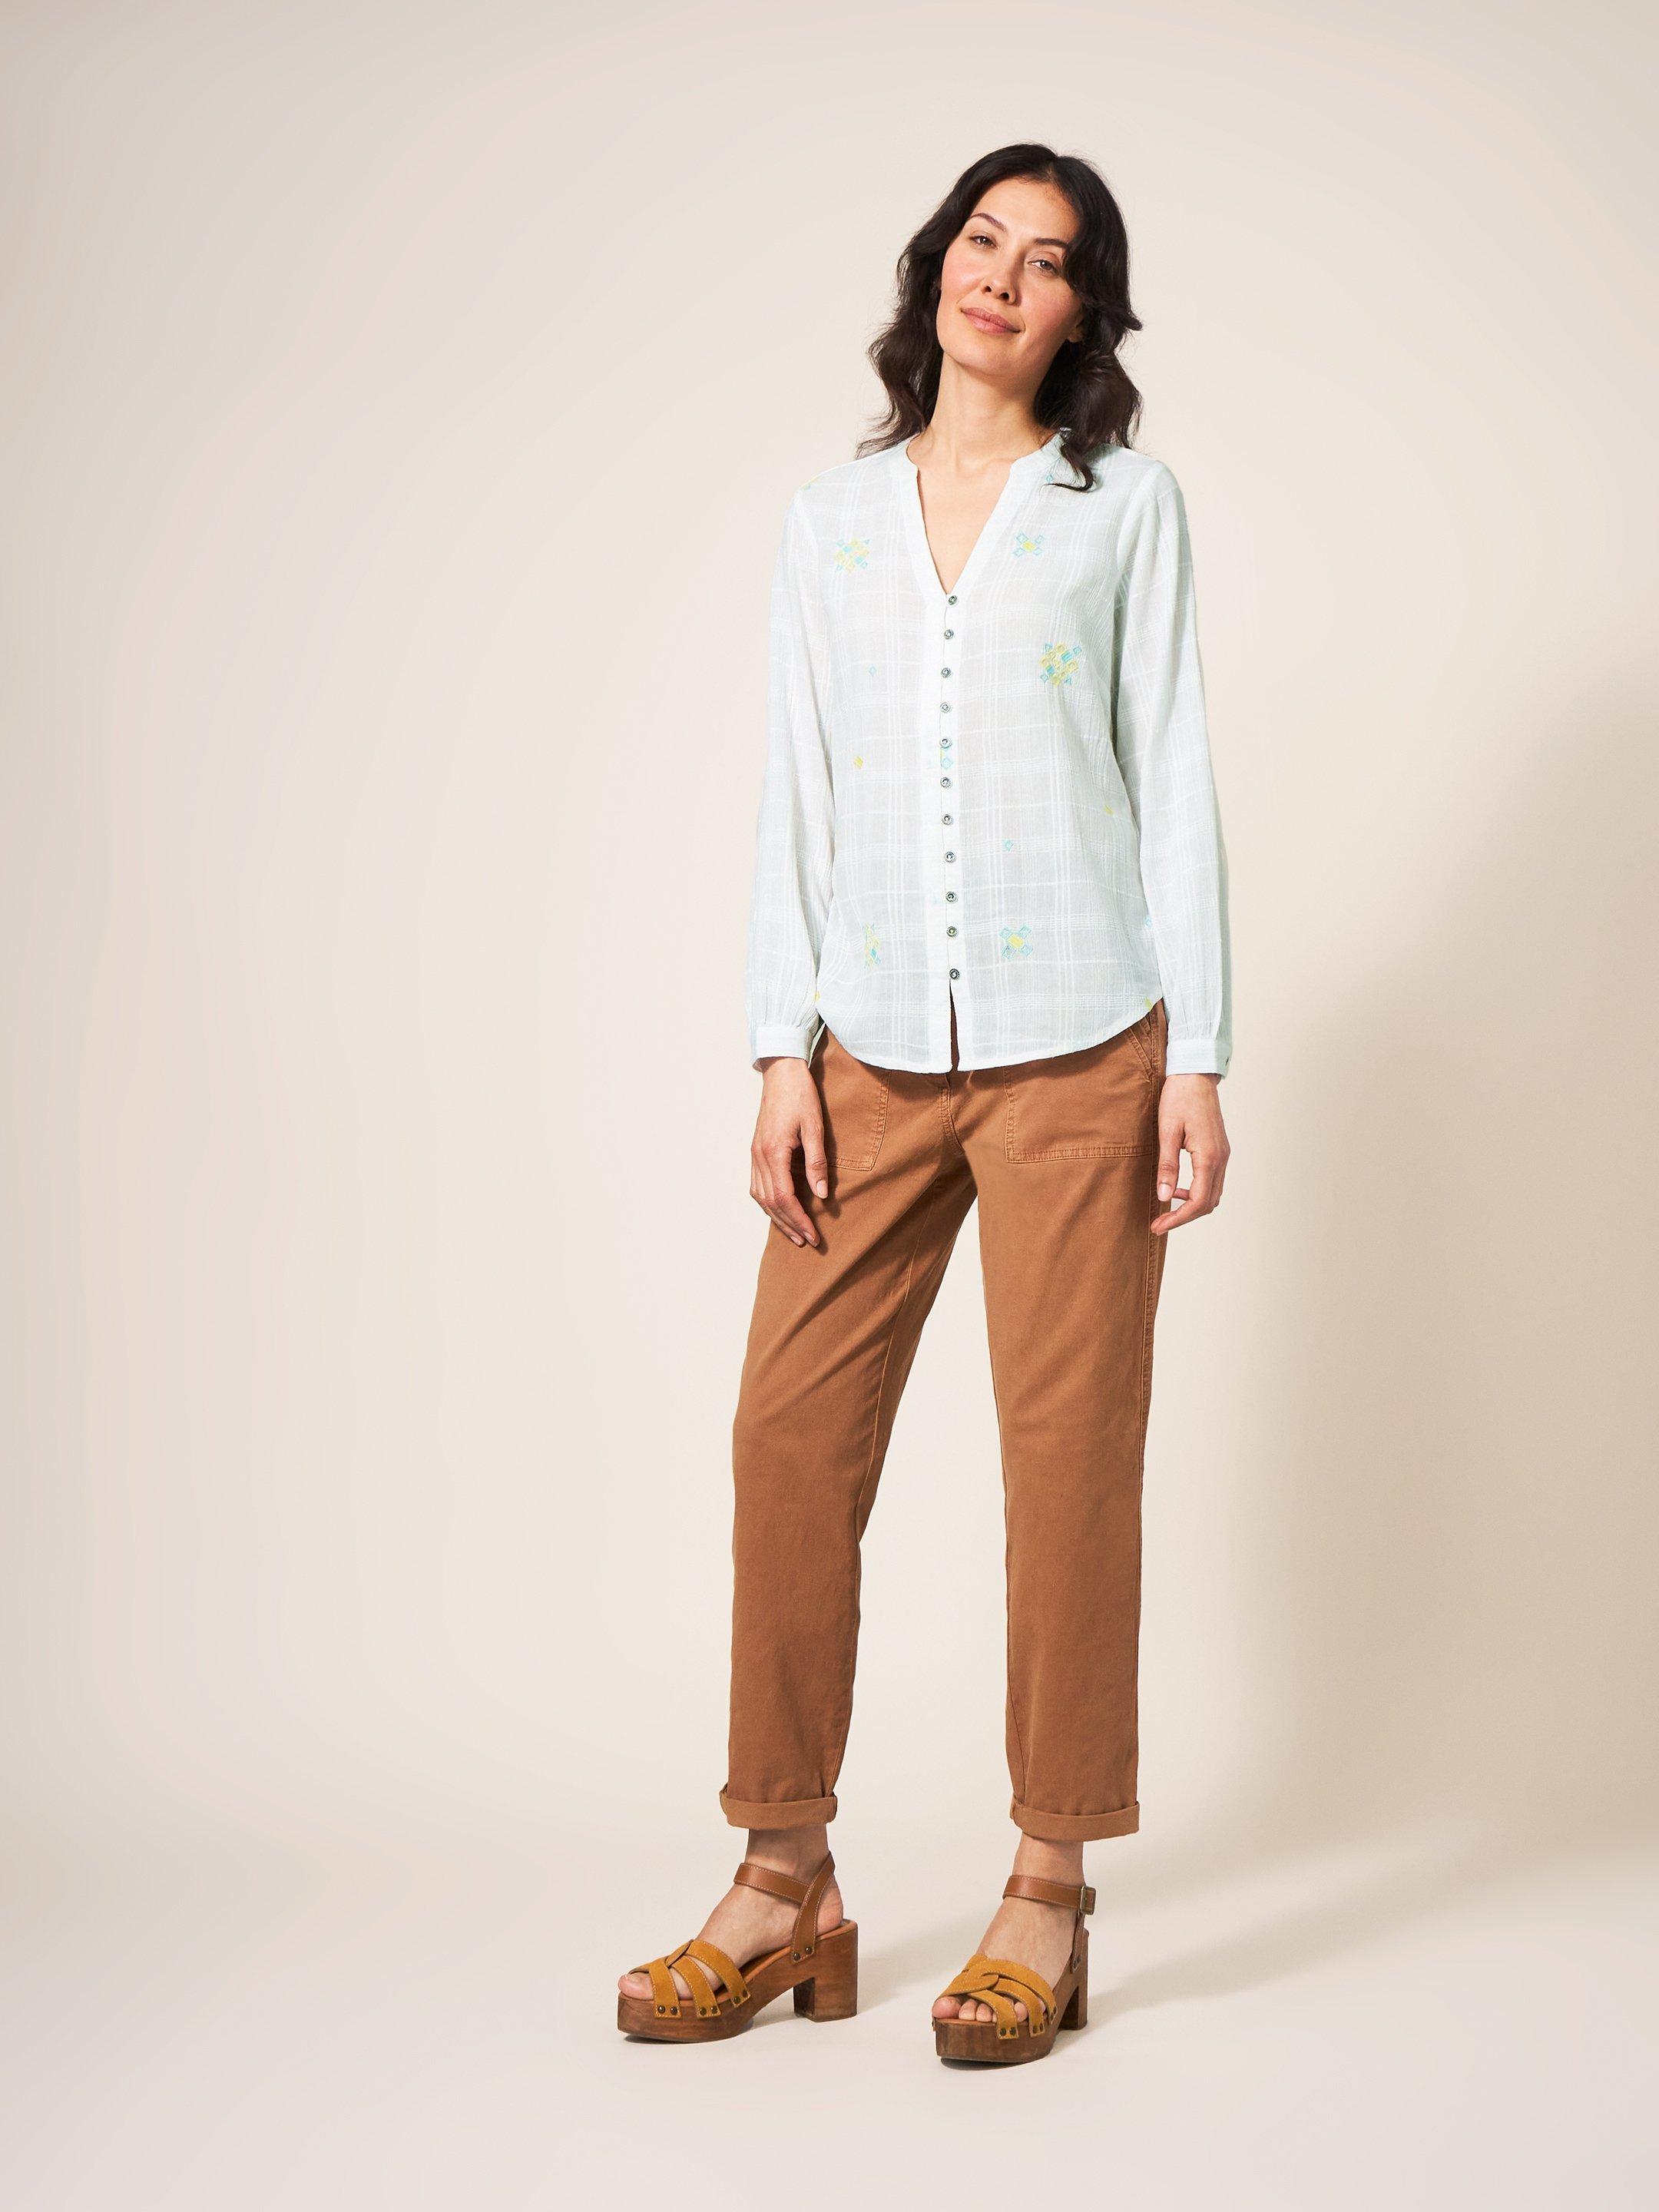 Kate Embroidered Cotton Shirt in PALE IVORY - MODEL FRONT